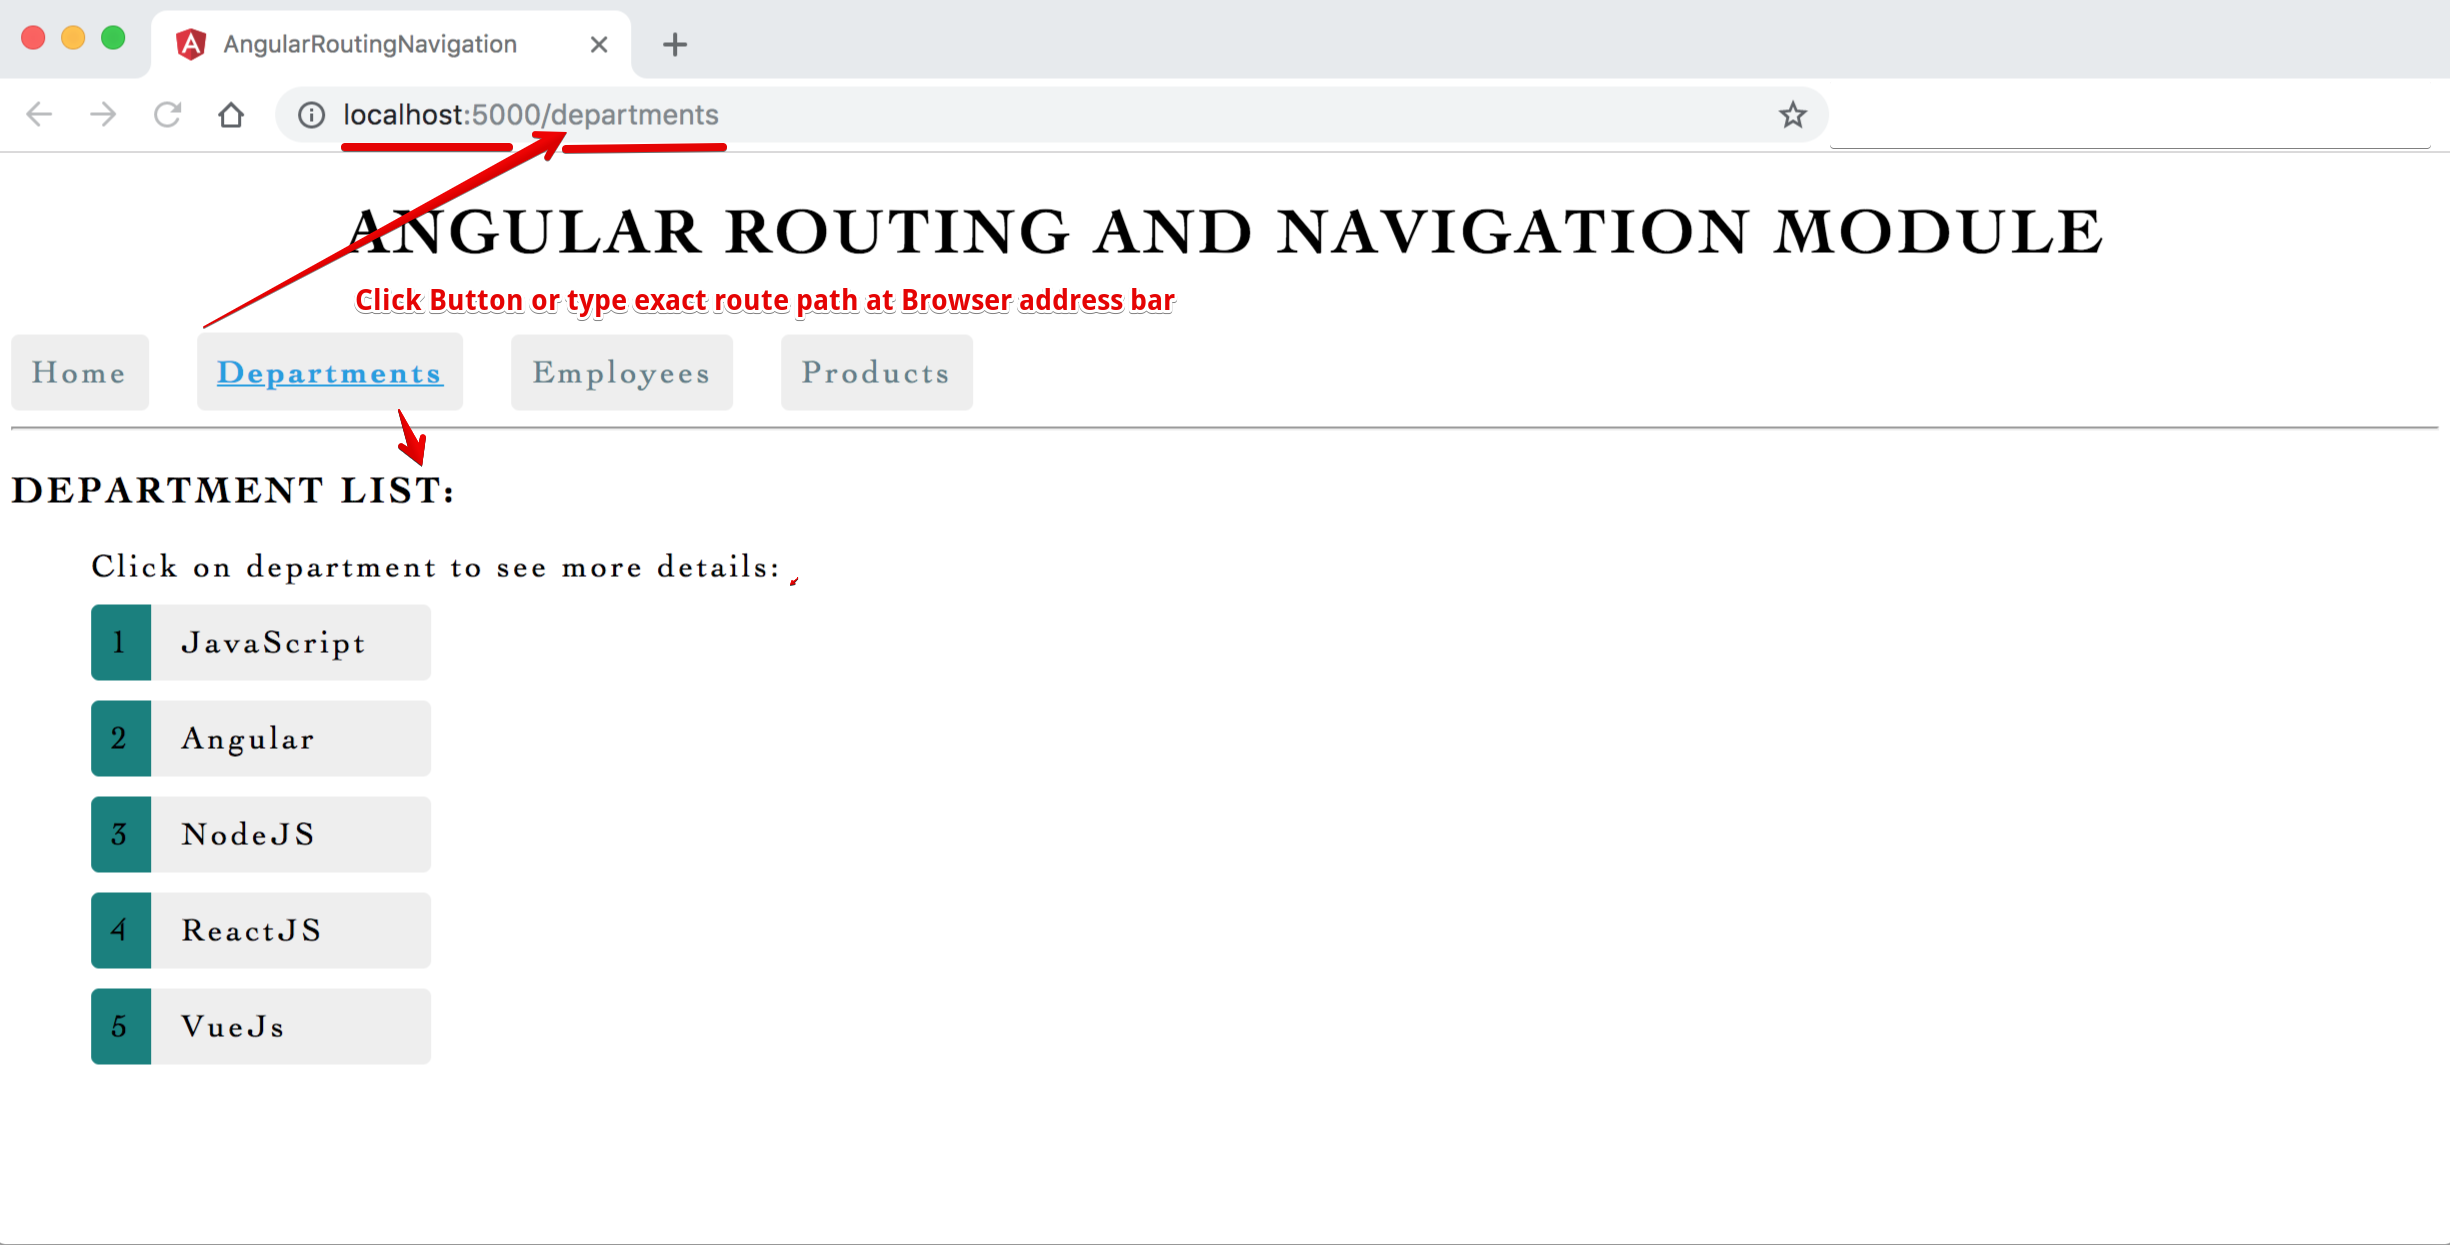 Image - Output - Angular Single Page Application (SPA) with Routing Navigation - Departments View